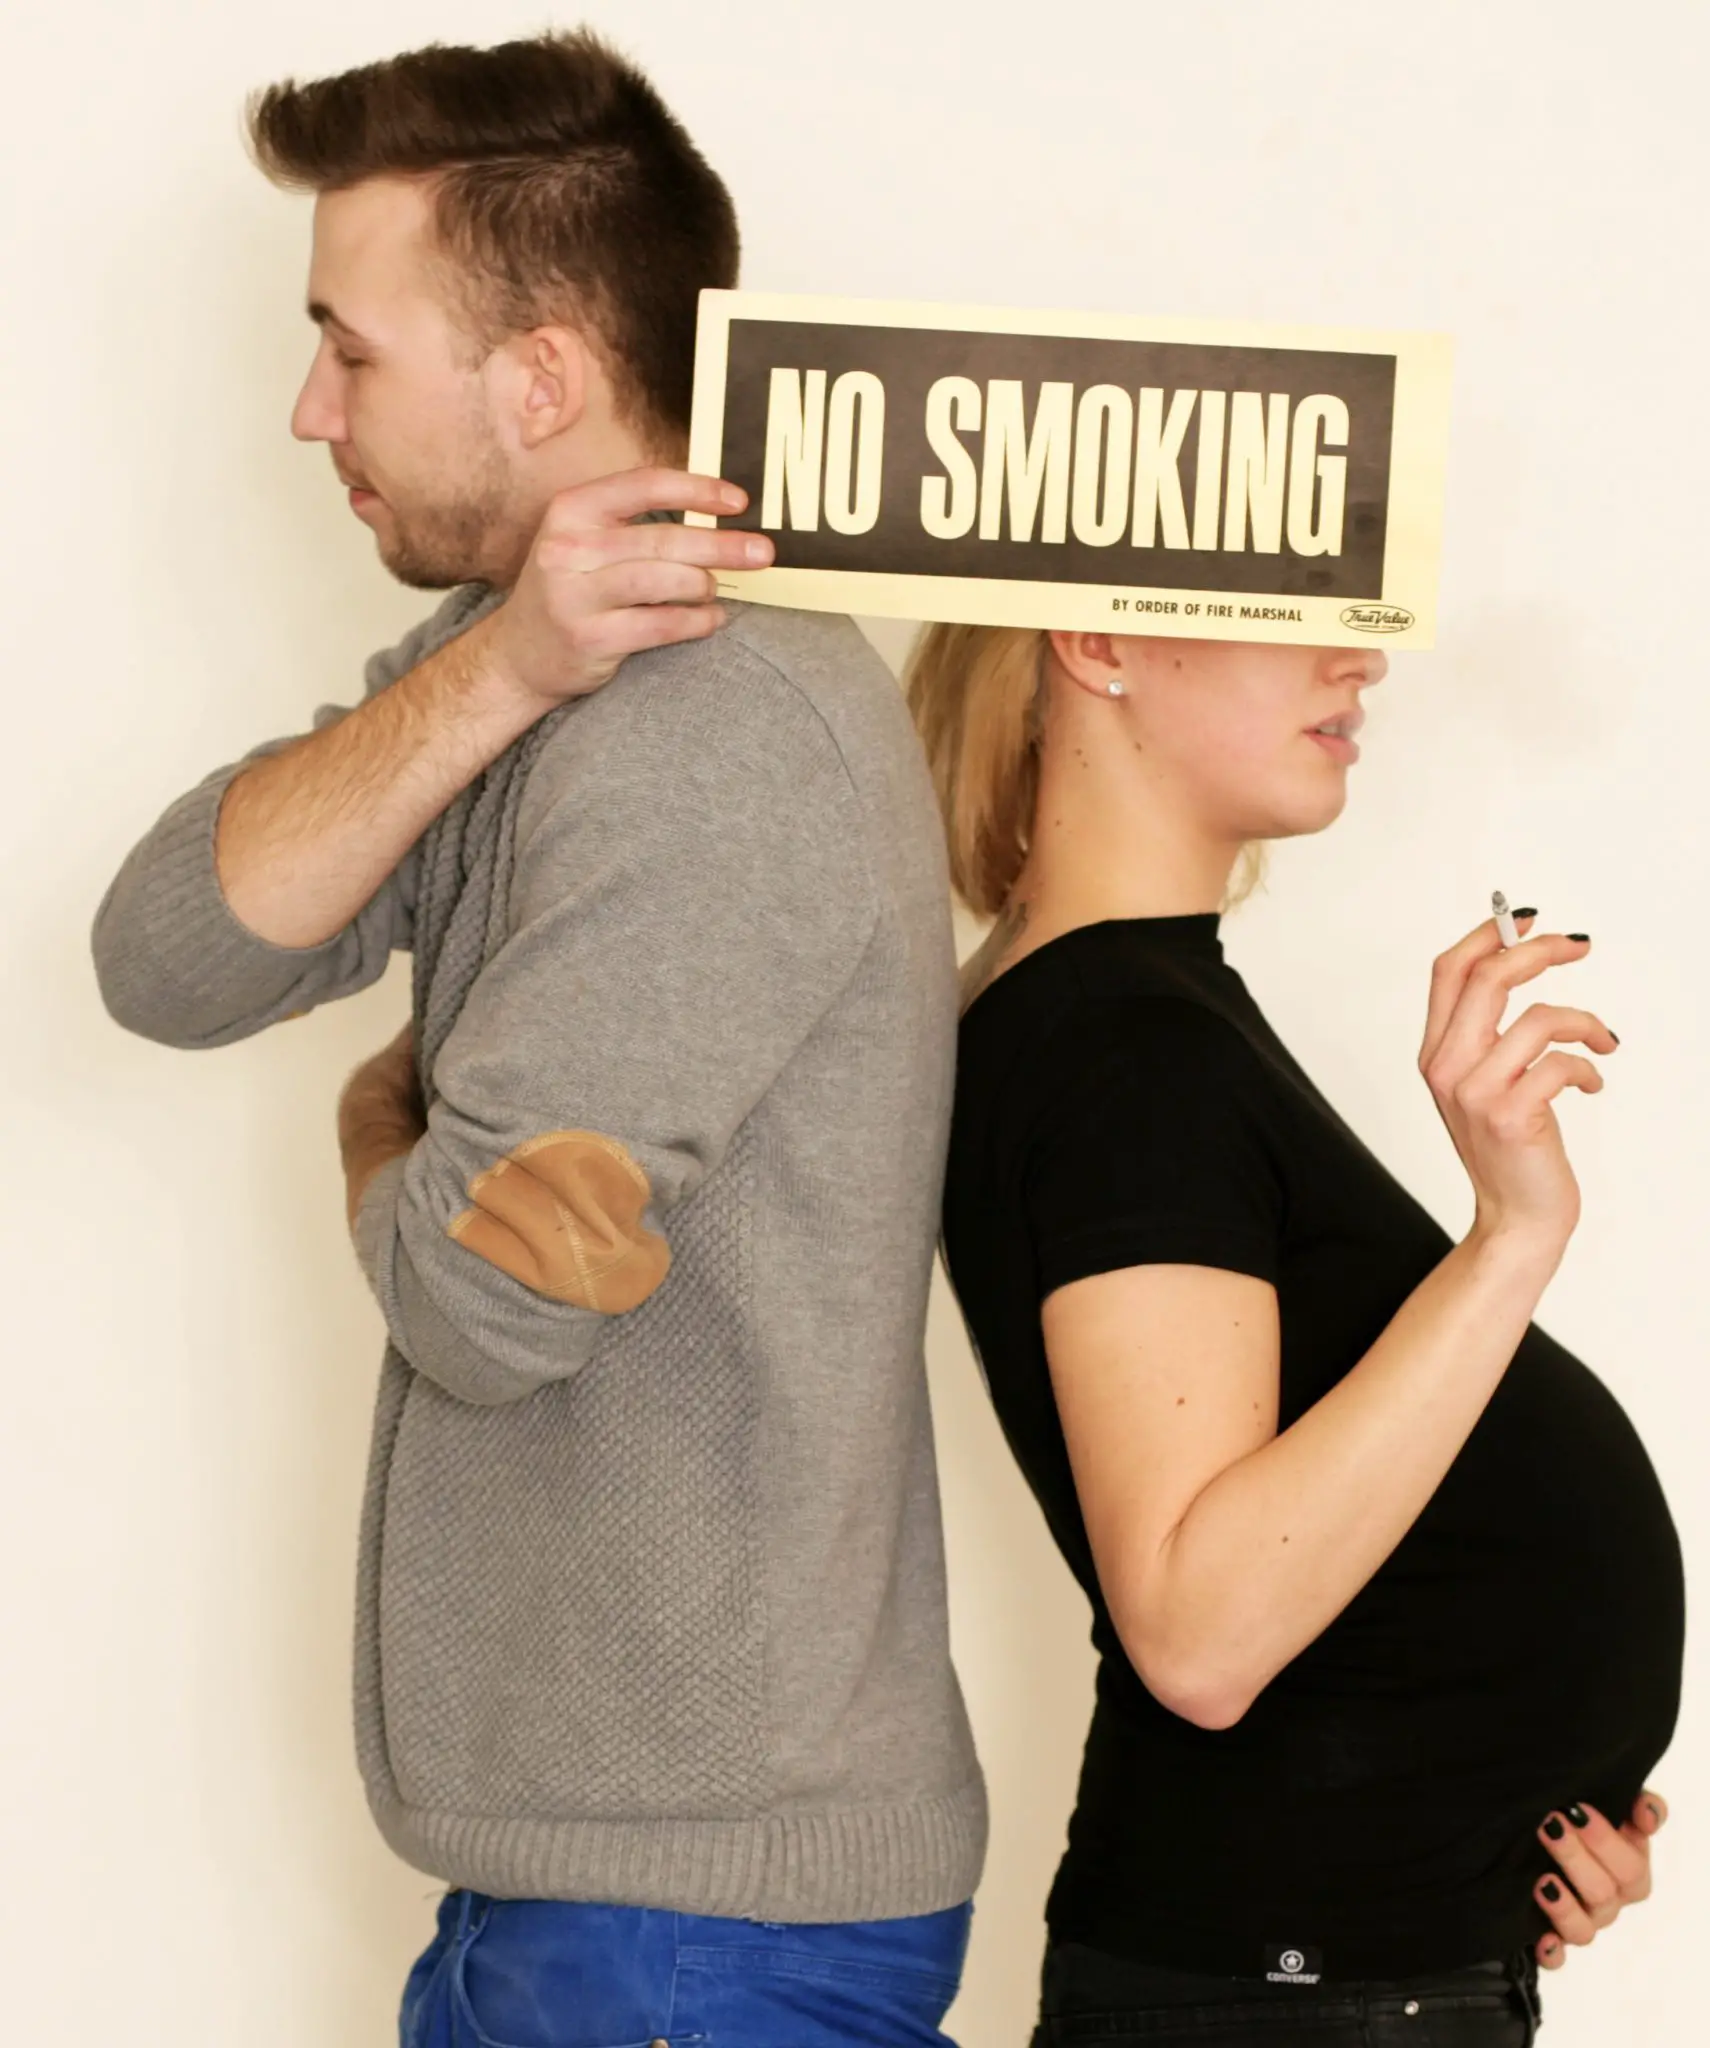 Should pregnant woman be fined for smoking?